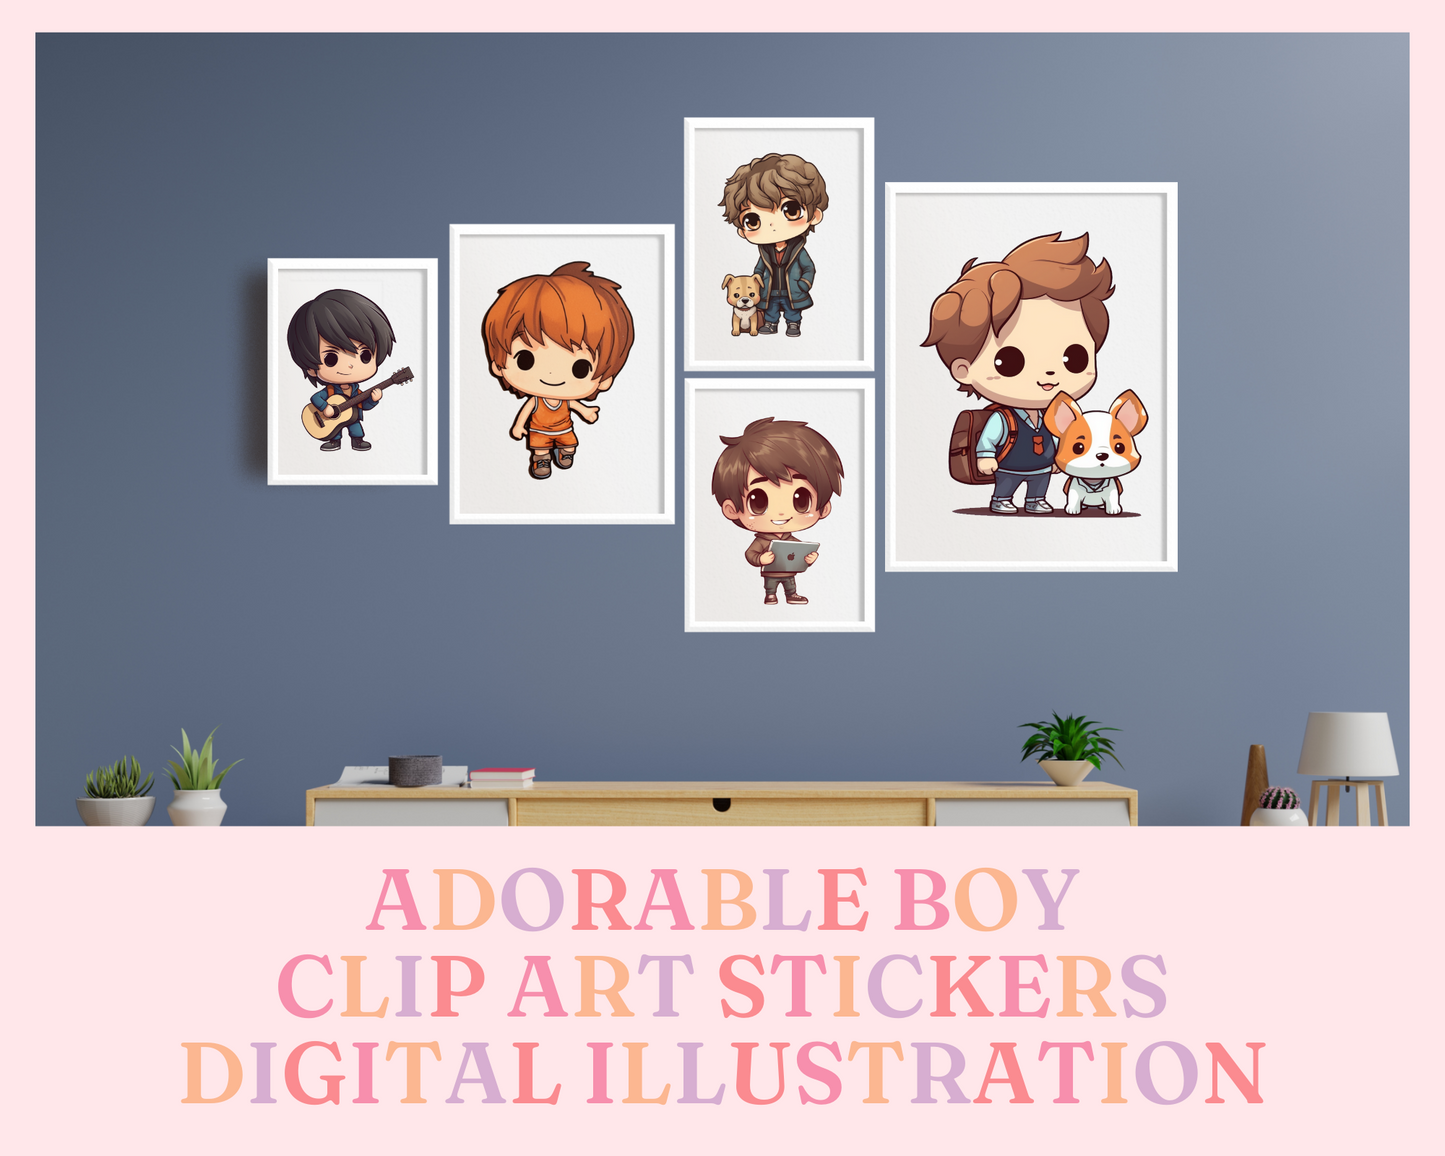 Adorable Playful Chibi Boy Stickers Clipart –Printable – Instant Download – High-Quality PNG - Transparent Background - Commercial Use